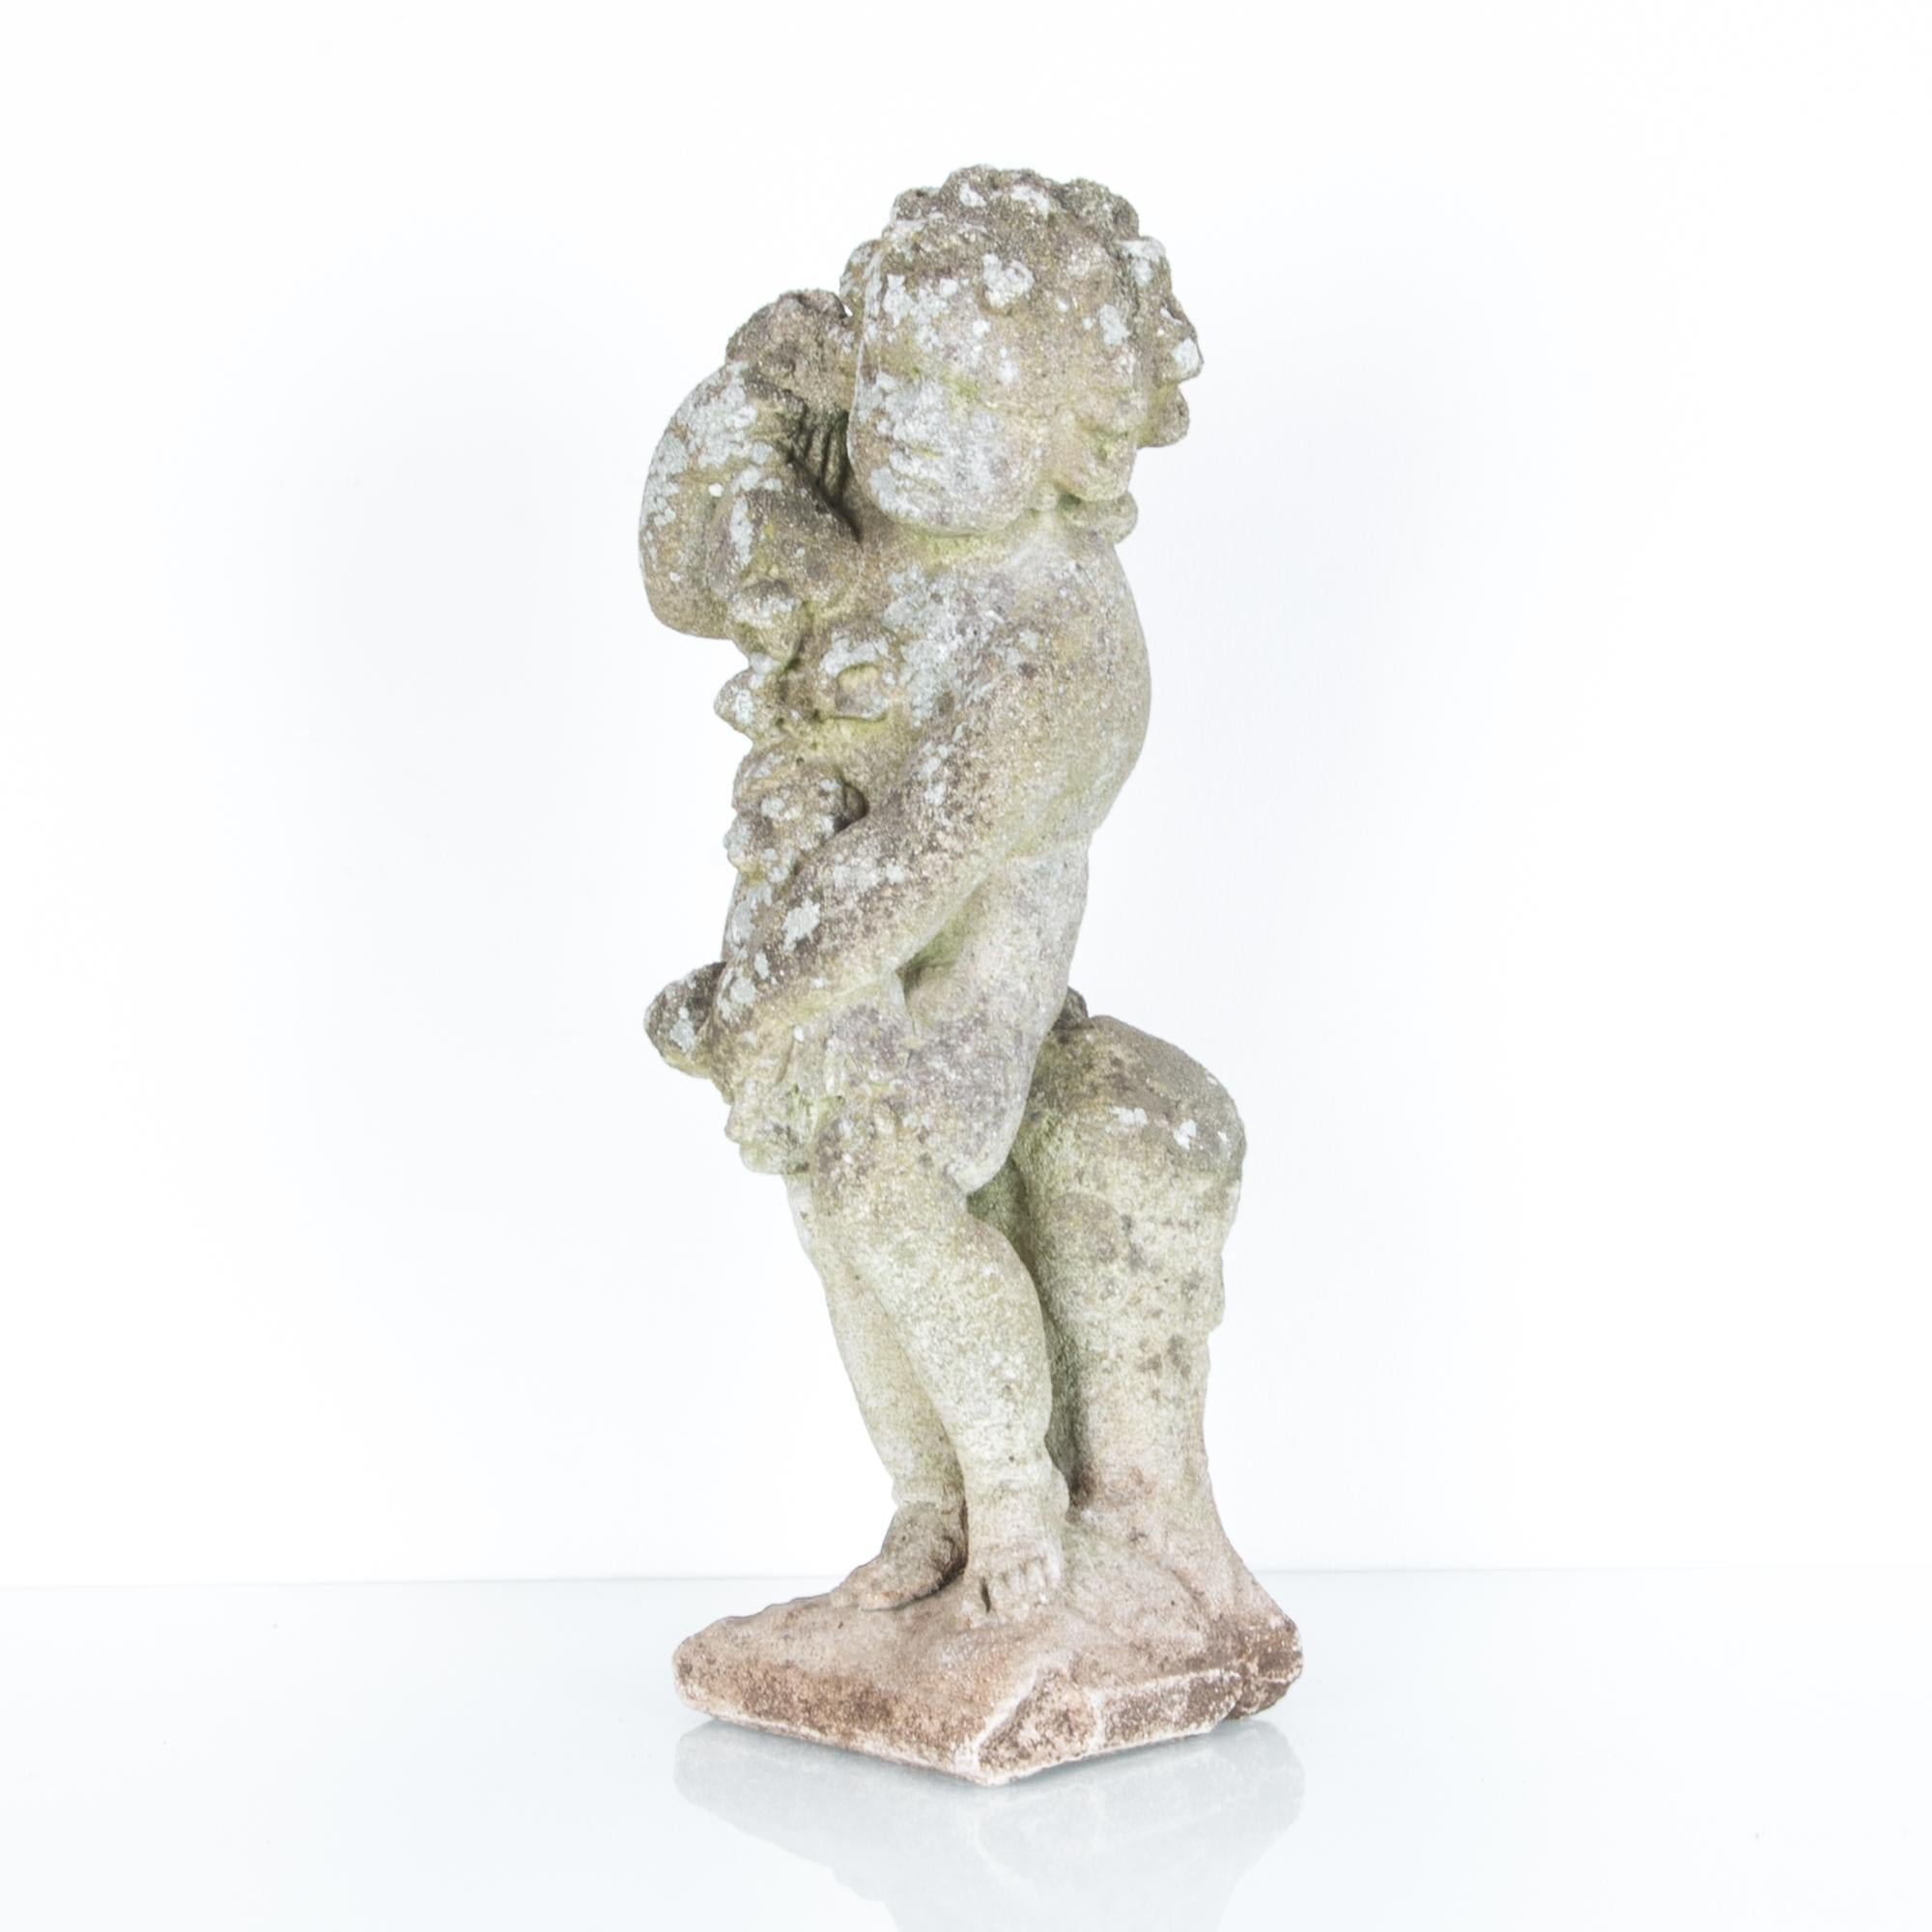 This concrete cherub statue was made in France, circa 1950. It holds a garland of flowers over its shoulder, a symbol of fertility. The grain of the statue is weathered and dappled with lichen, giving a nostalgic softness to the cherub’s expression.